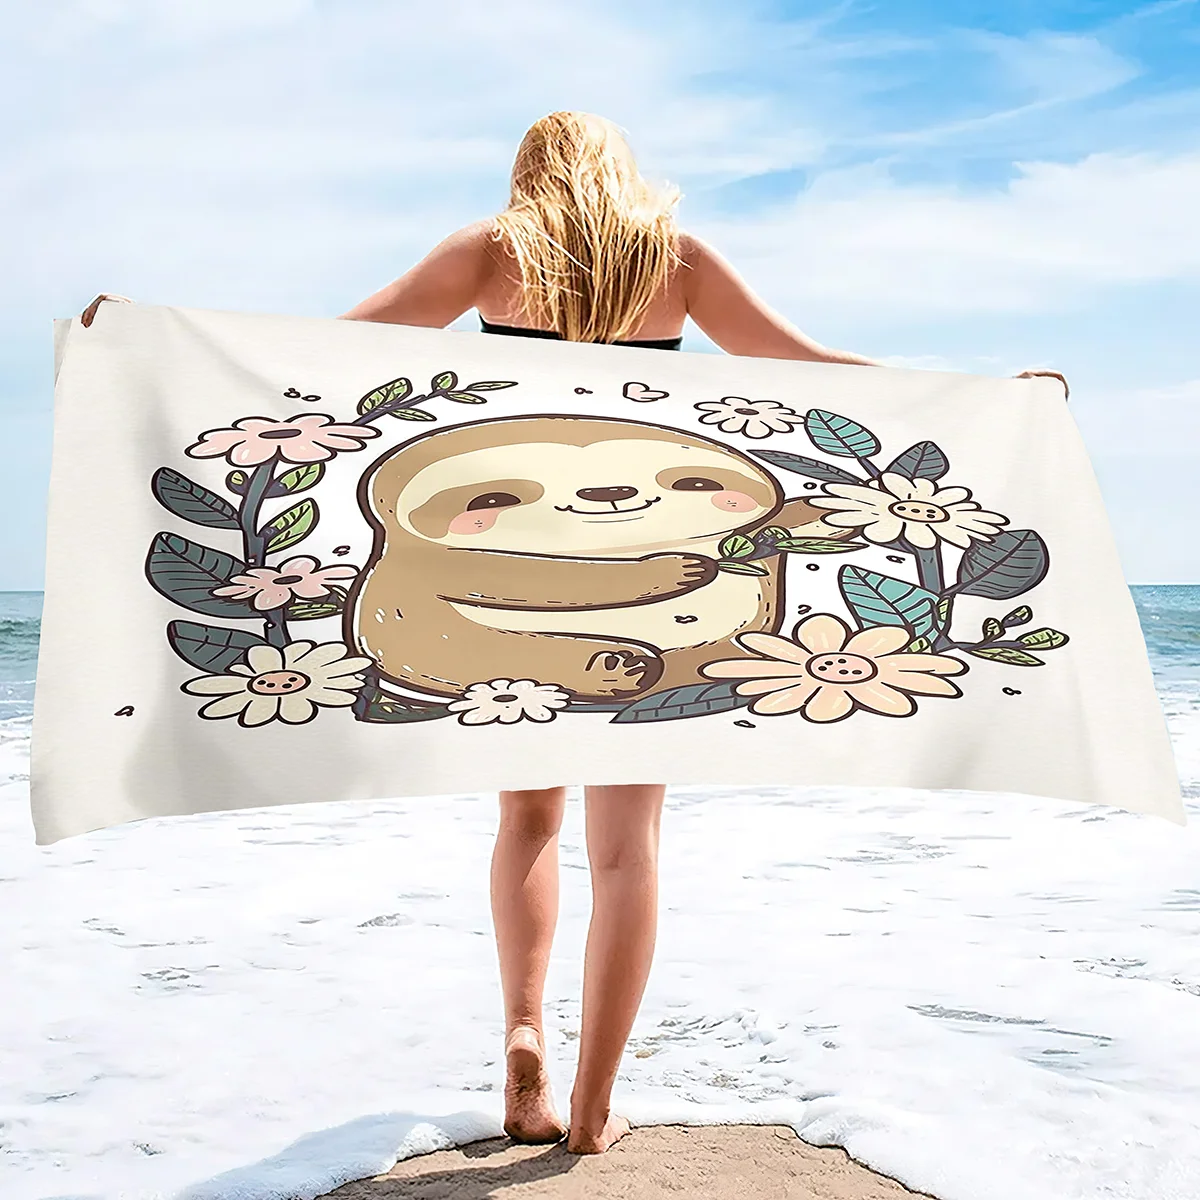 

Oversized Sloth Beach Towel for Women Girls Kids,Super Soft Microfiber Quick Dry and Sand Free Towel,Lightweight Pool Yoga Towel